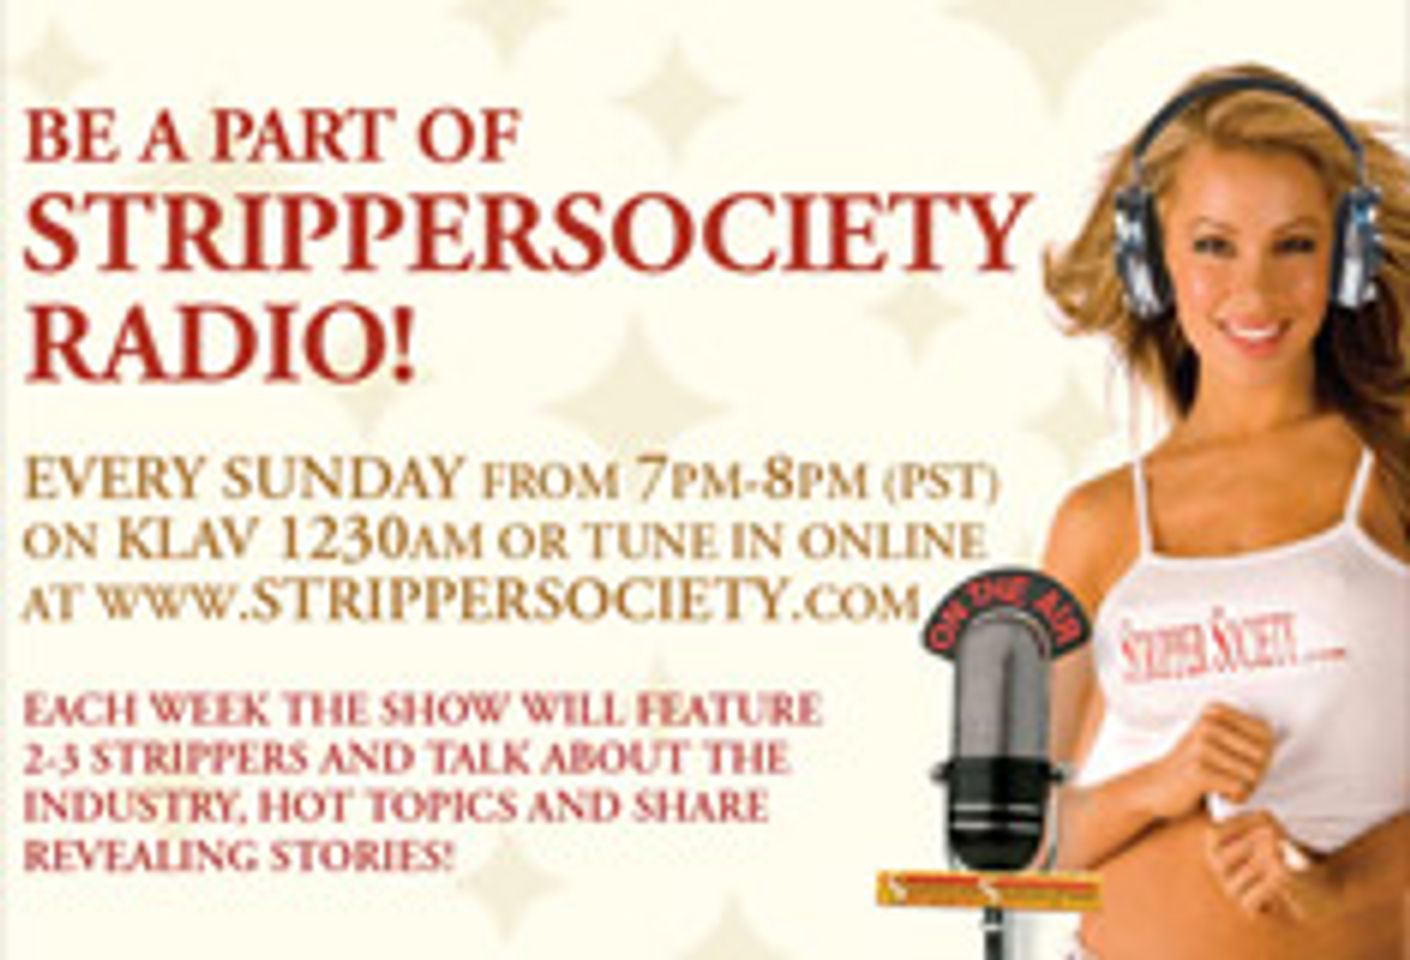 Stripper Radio to Feature Strippers and the Ministry